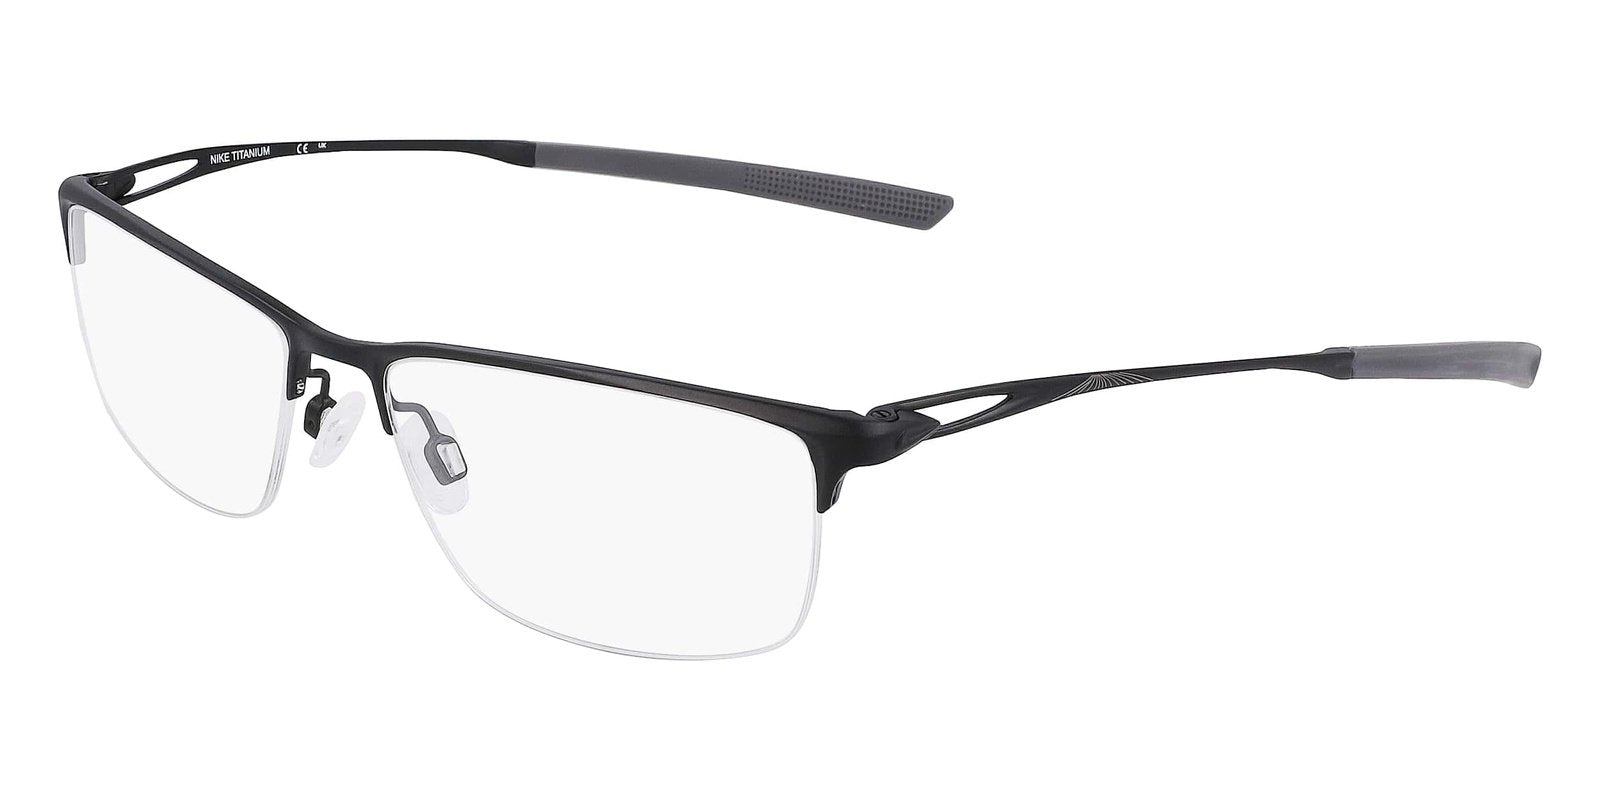  Nike 6064 Black (001) | Spectacle Clinic